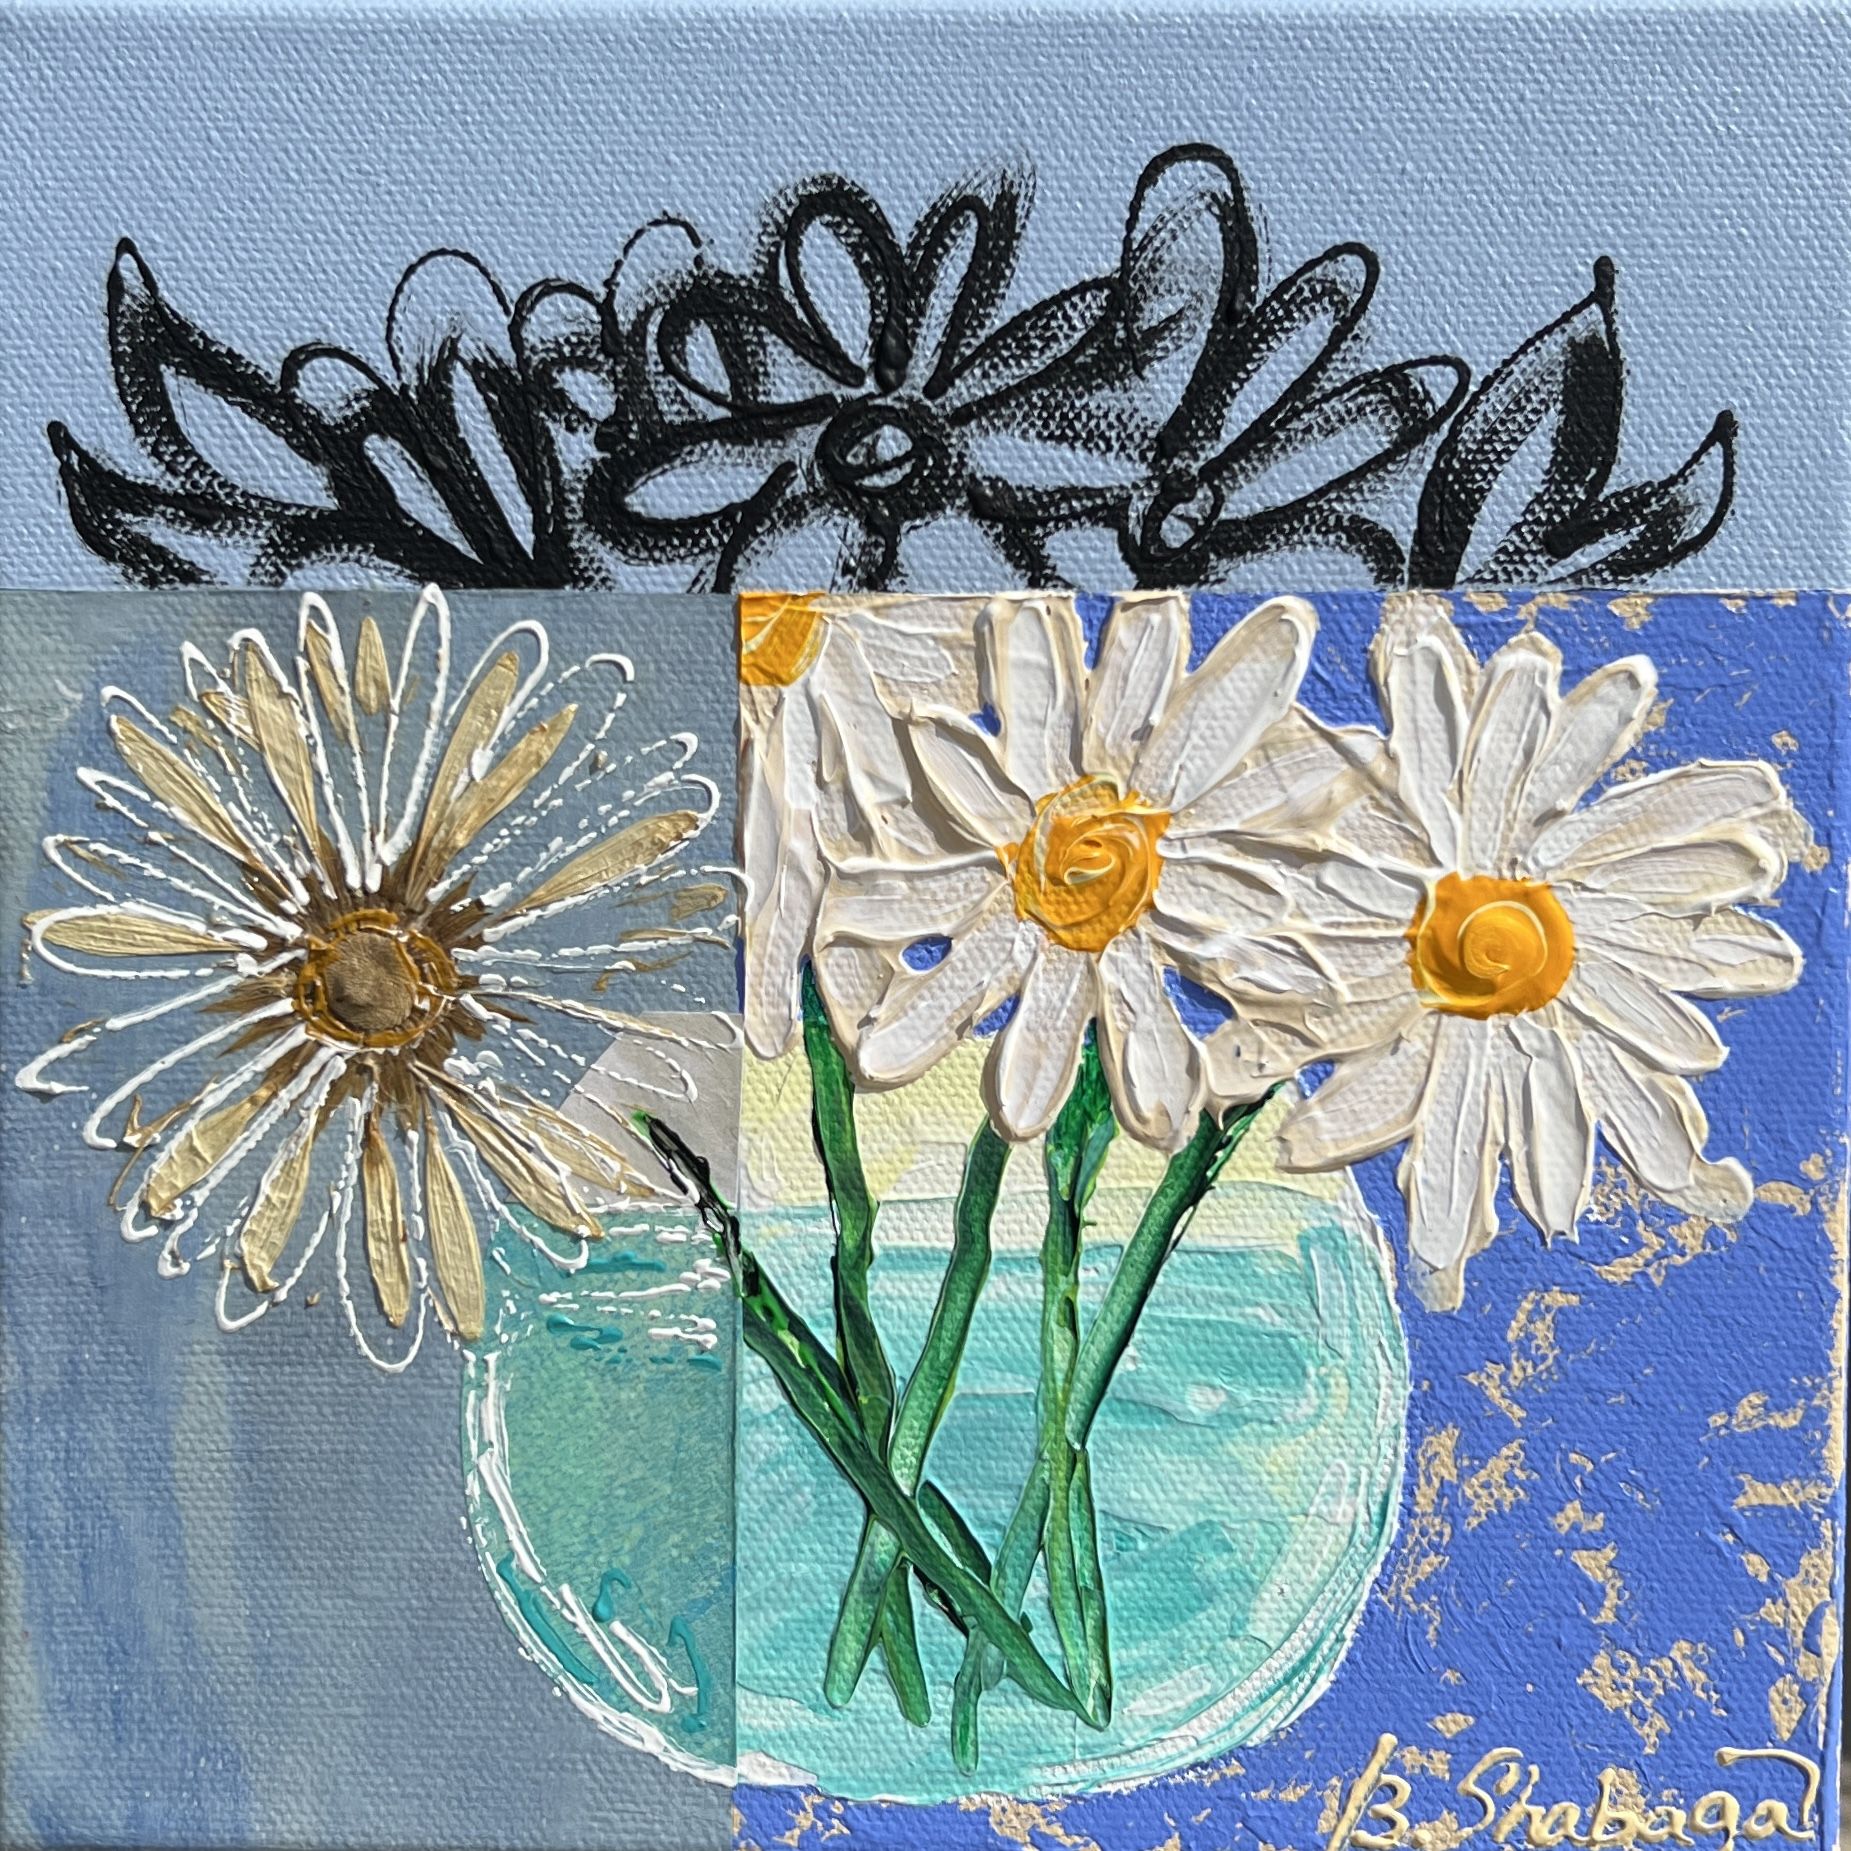 Floral Study 2 - Daisies